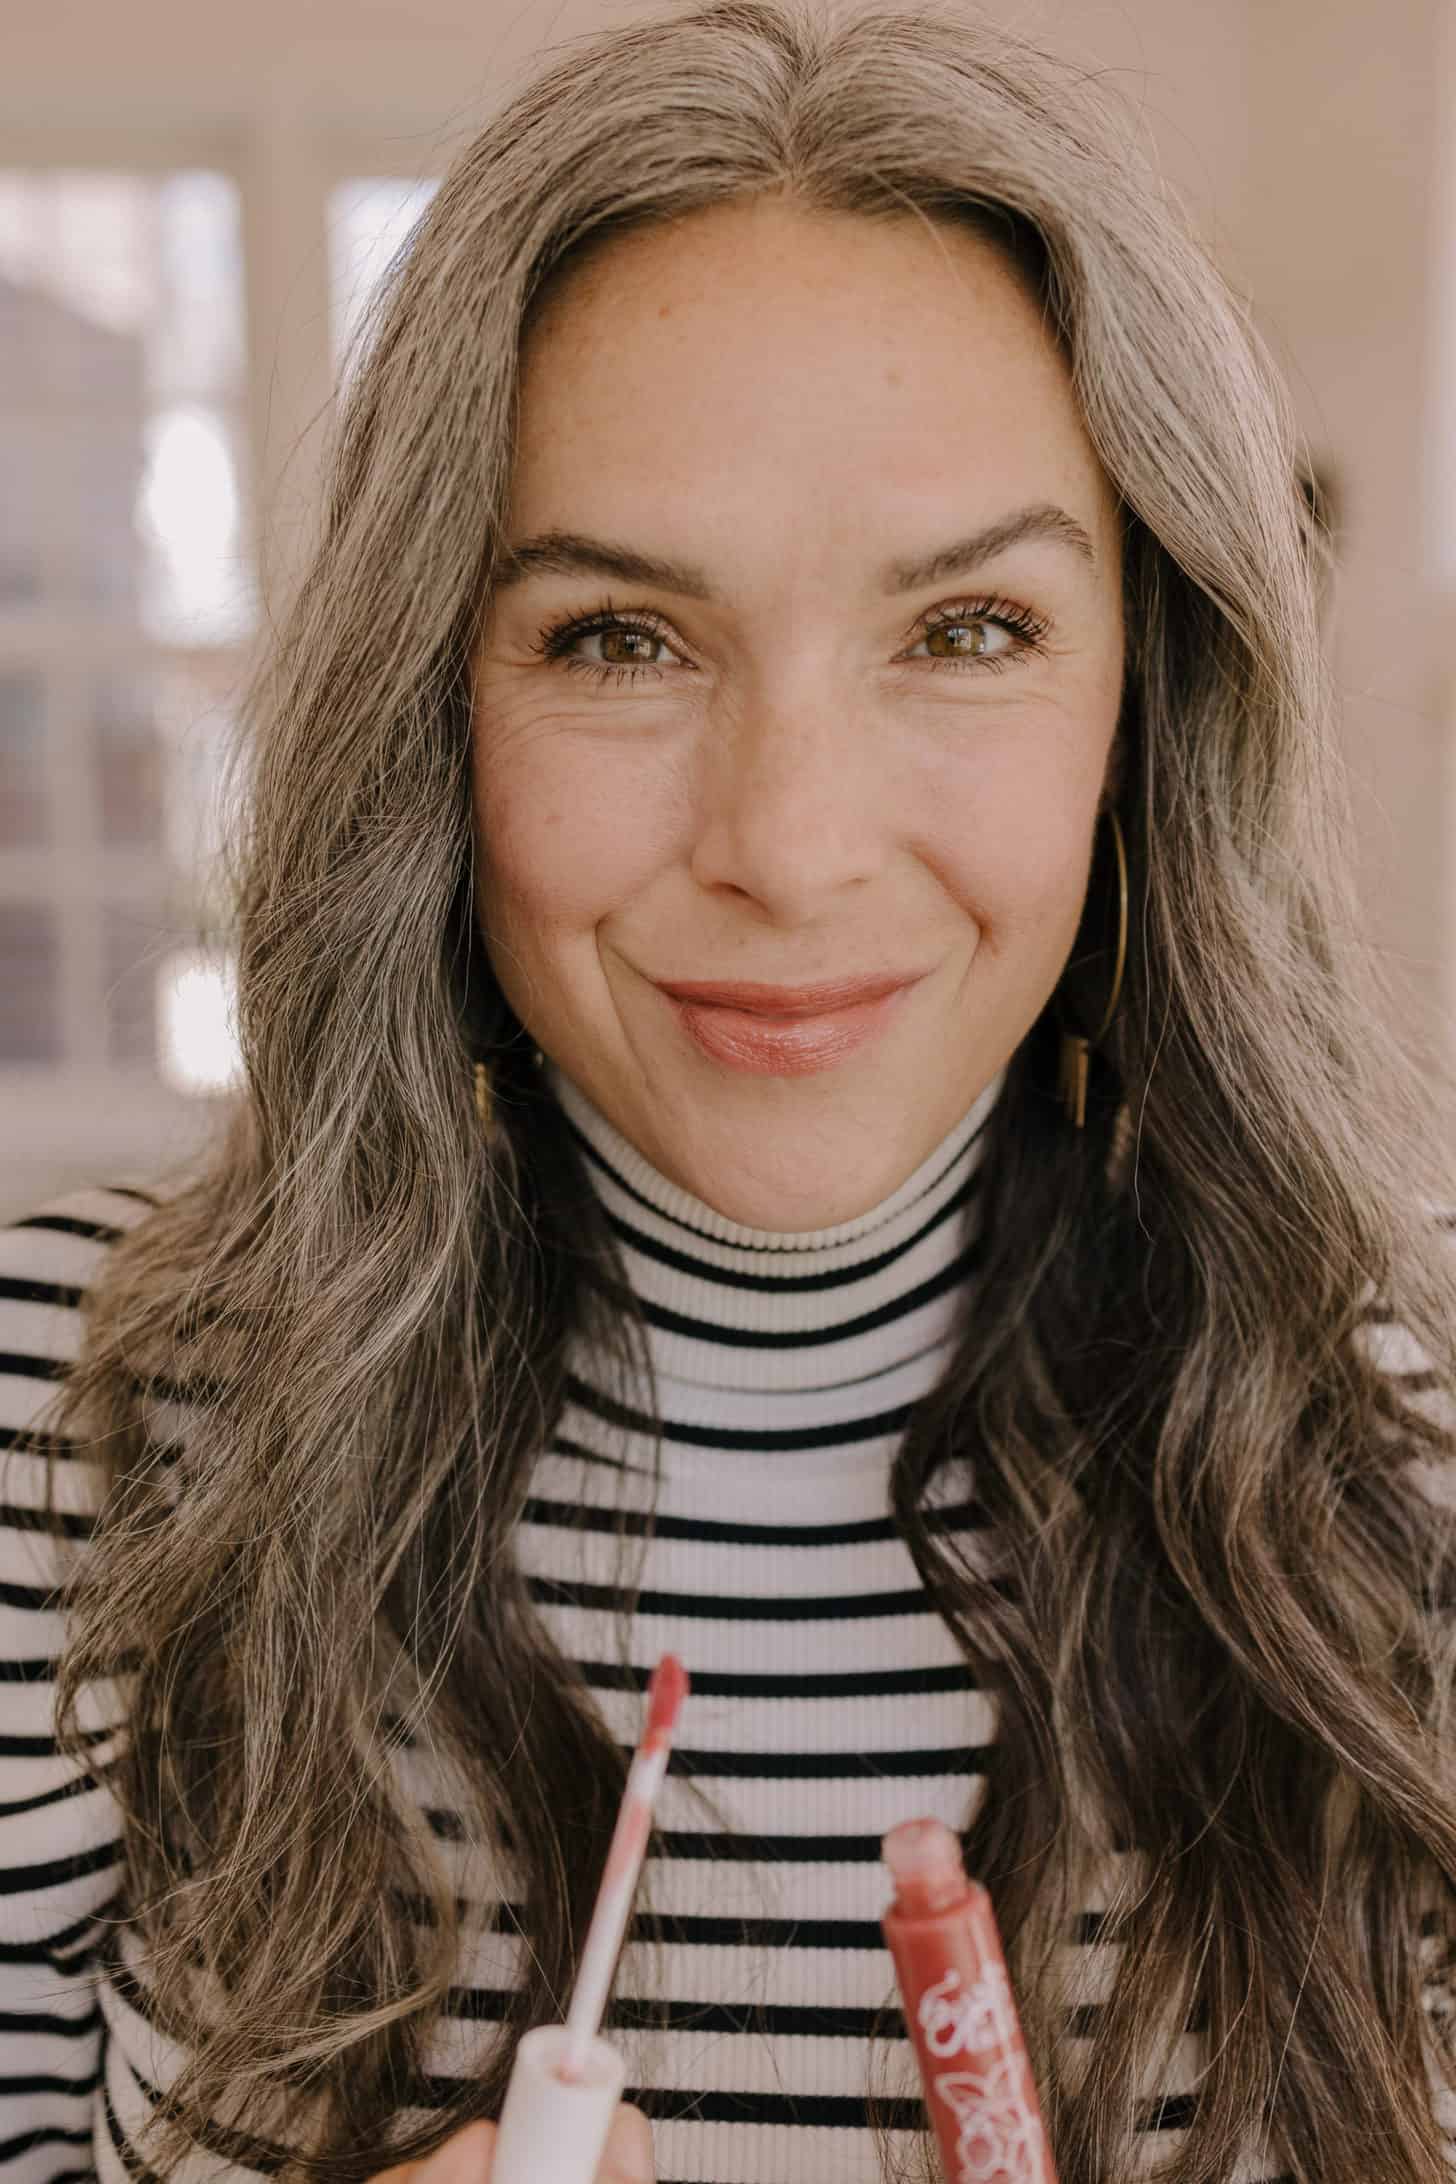 a woman holding a tube of lip gloss in her hand and smiling with the gloss on her lips